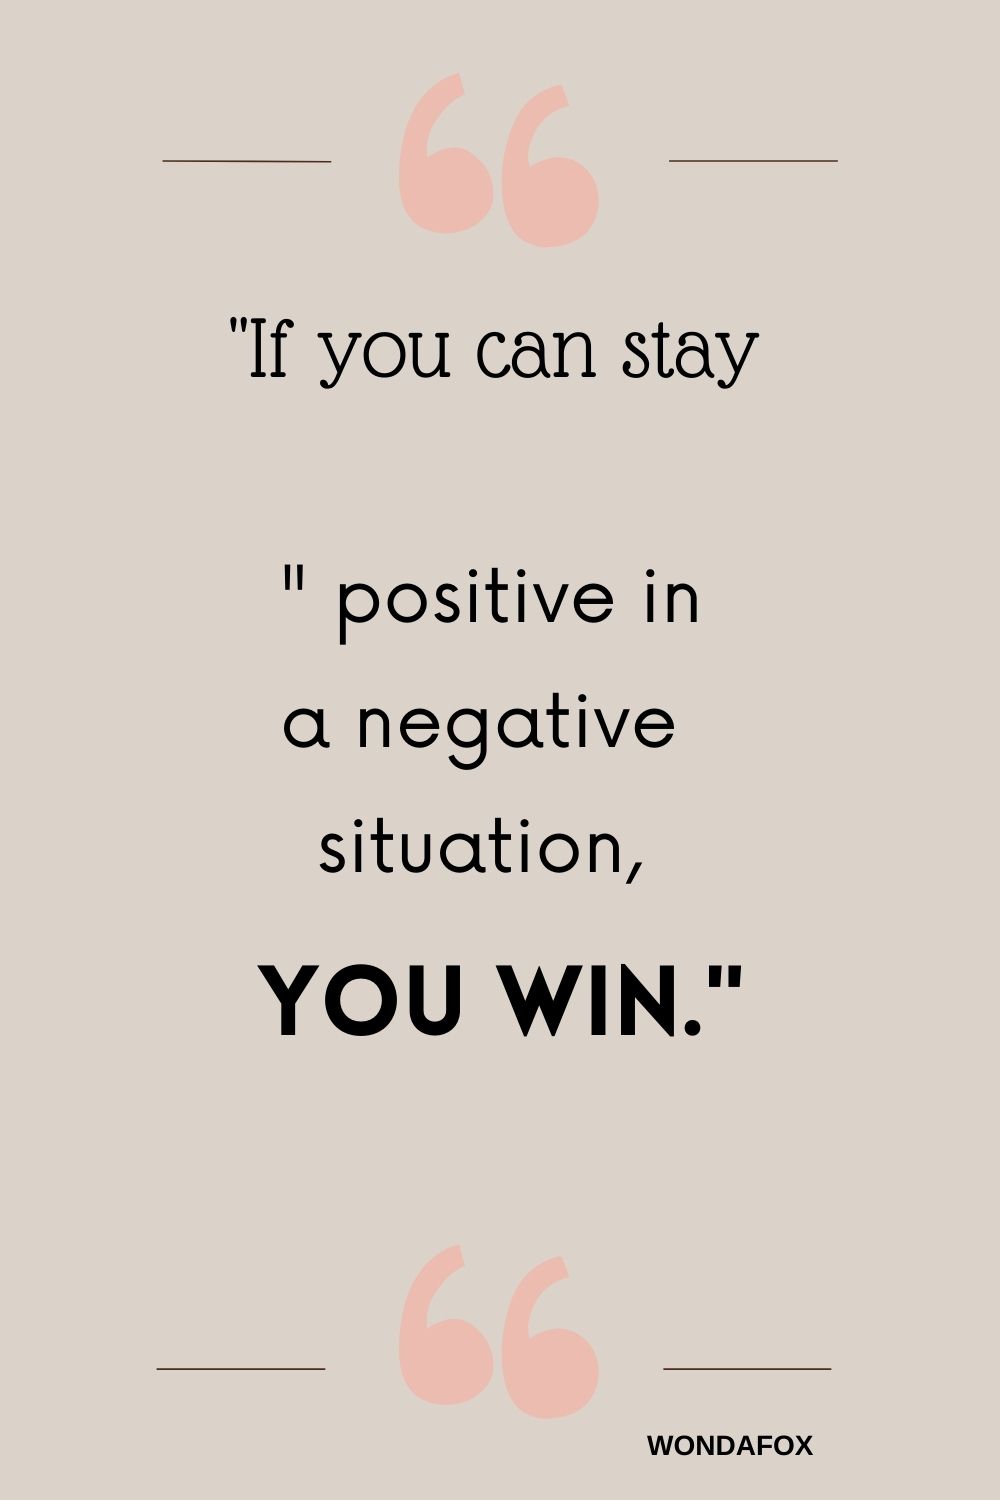  "If you can stay positive in a negative situation, you win." Short Positive Quotes 